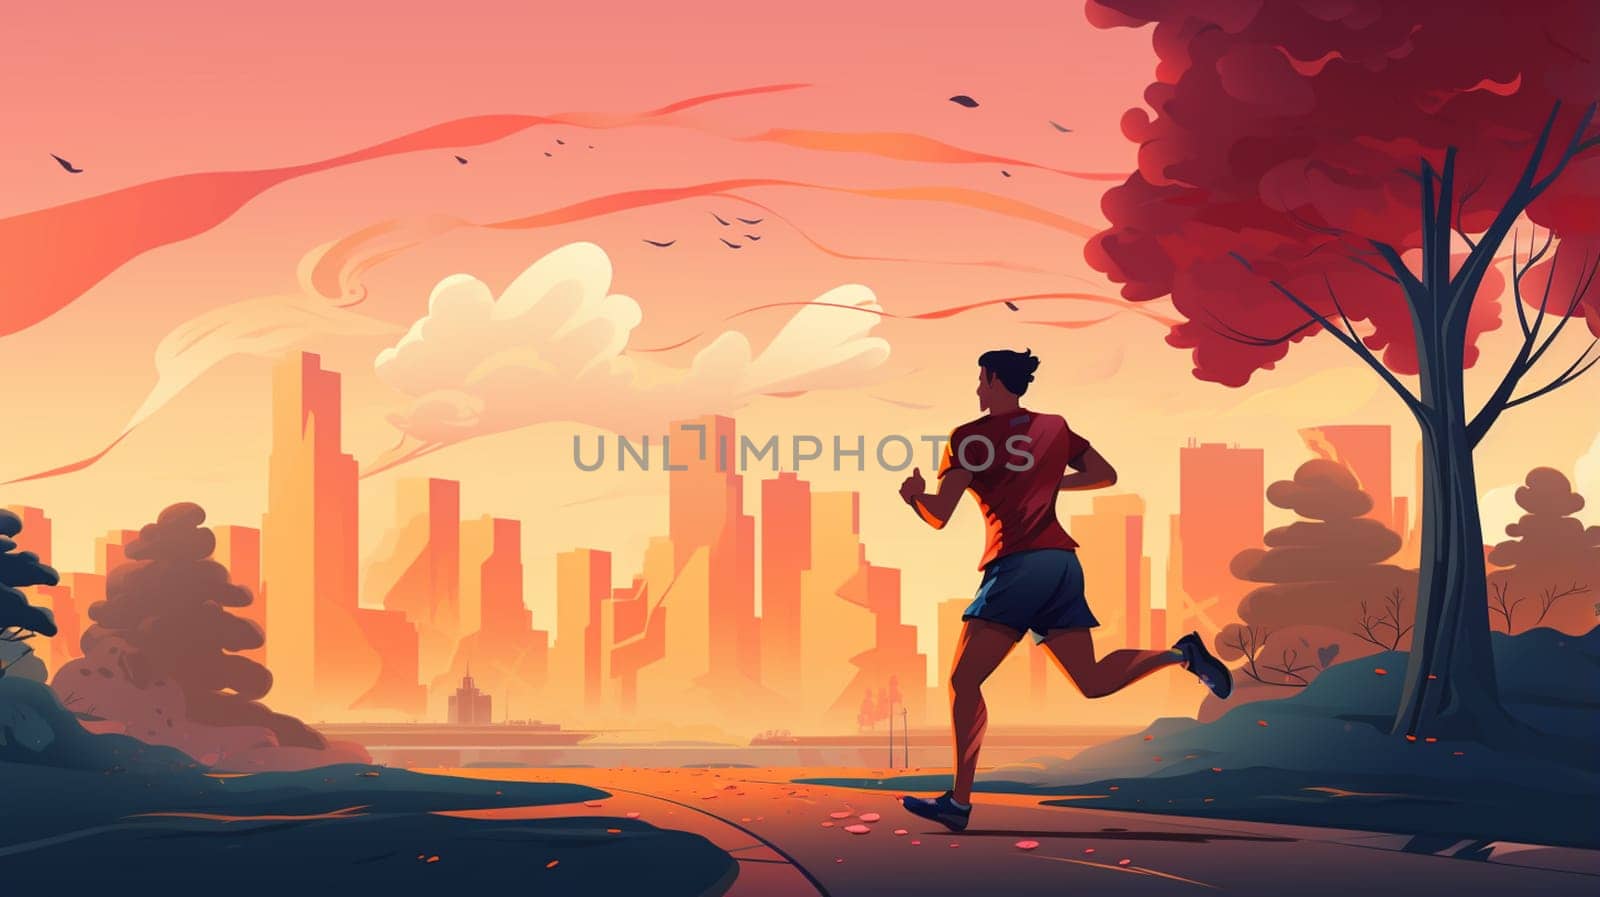 Jogging man on outdoor sport with city view, vertical illustration. High quality photo